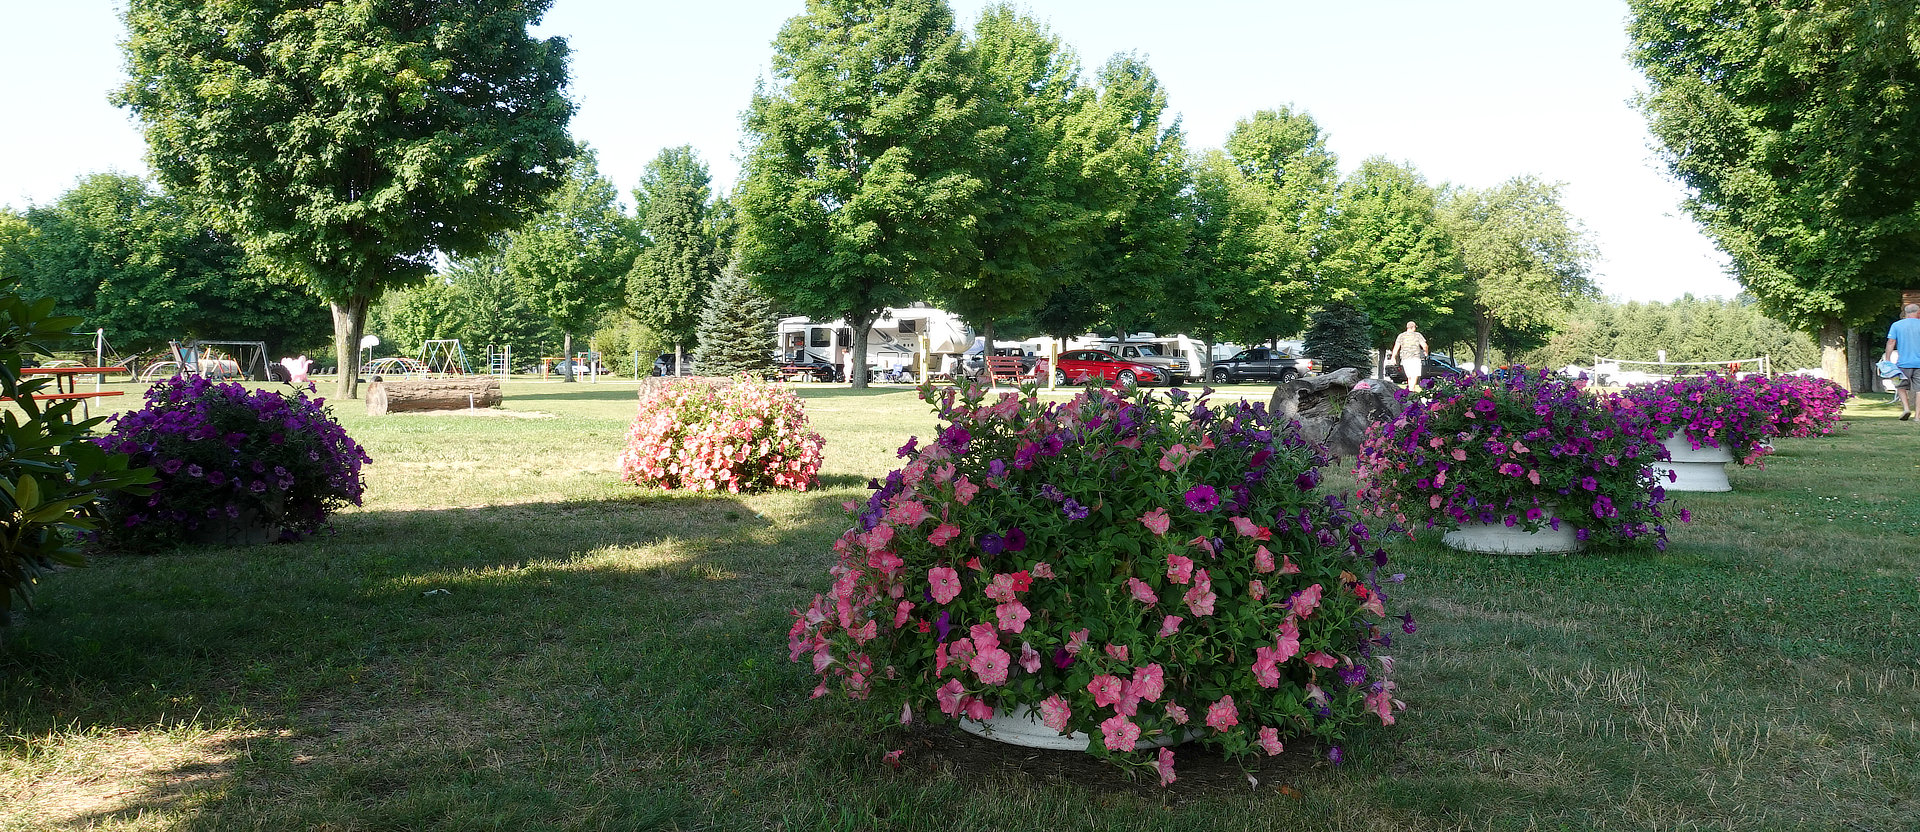 Flowers and RV sites